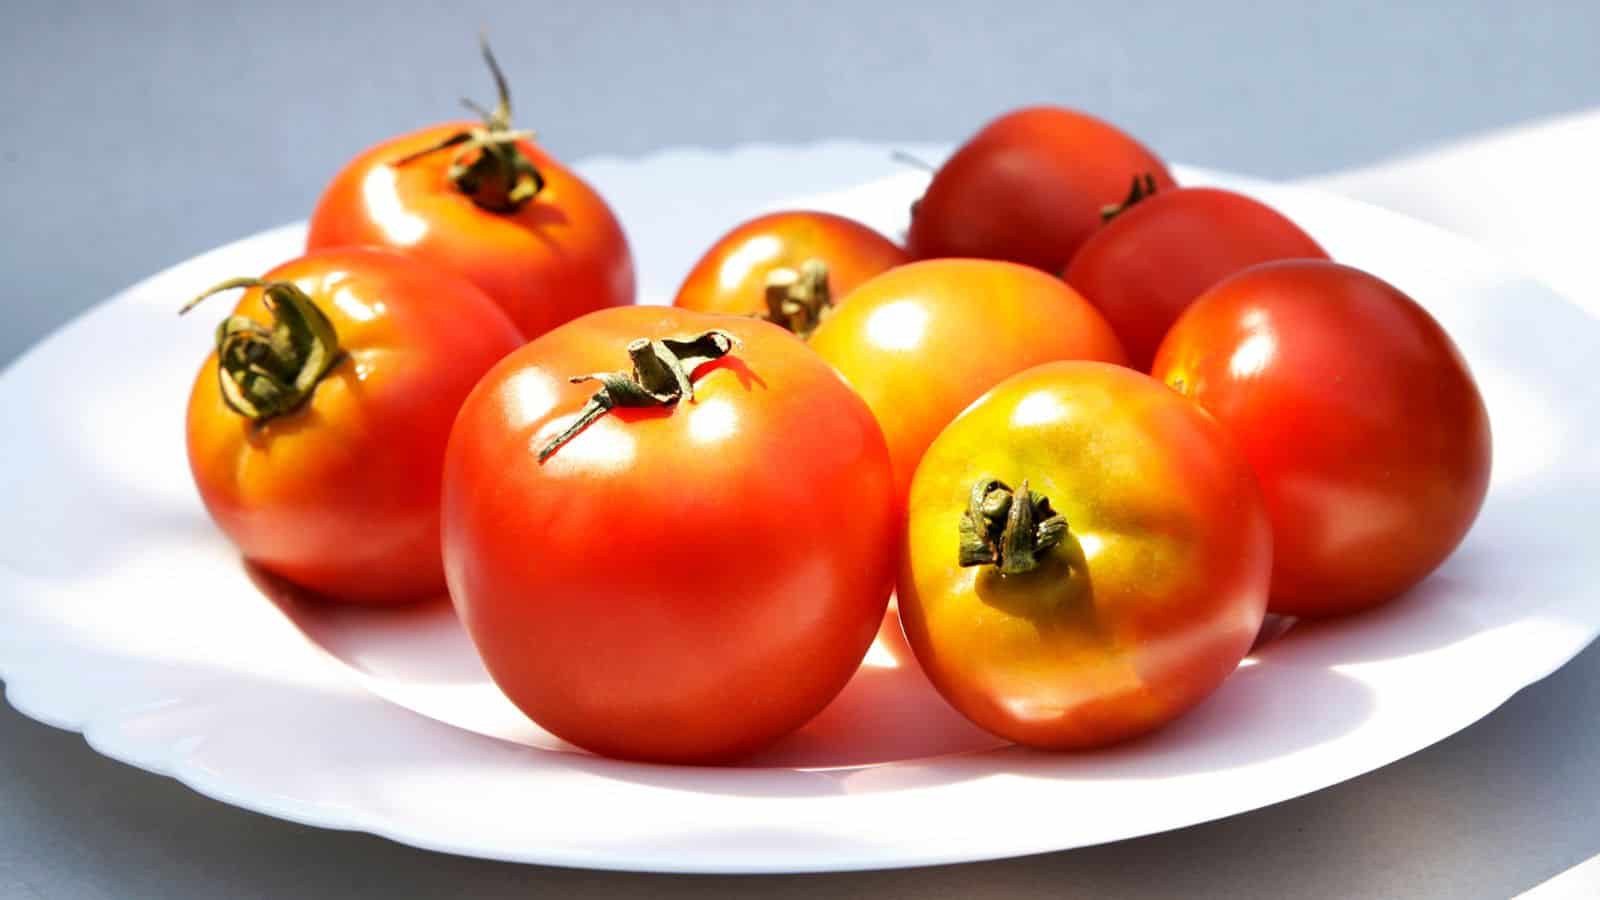 A plate of tomatoes in white background.